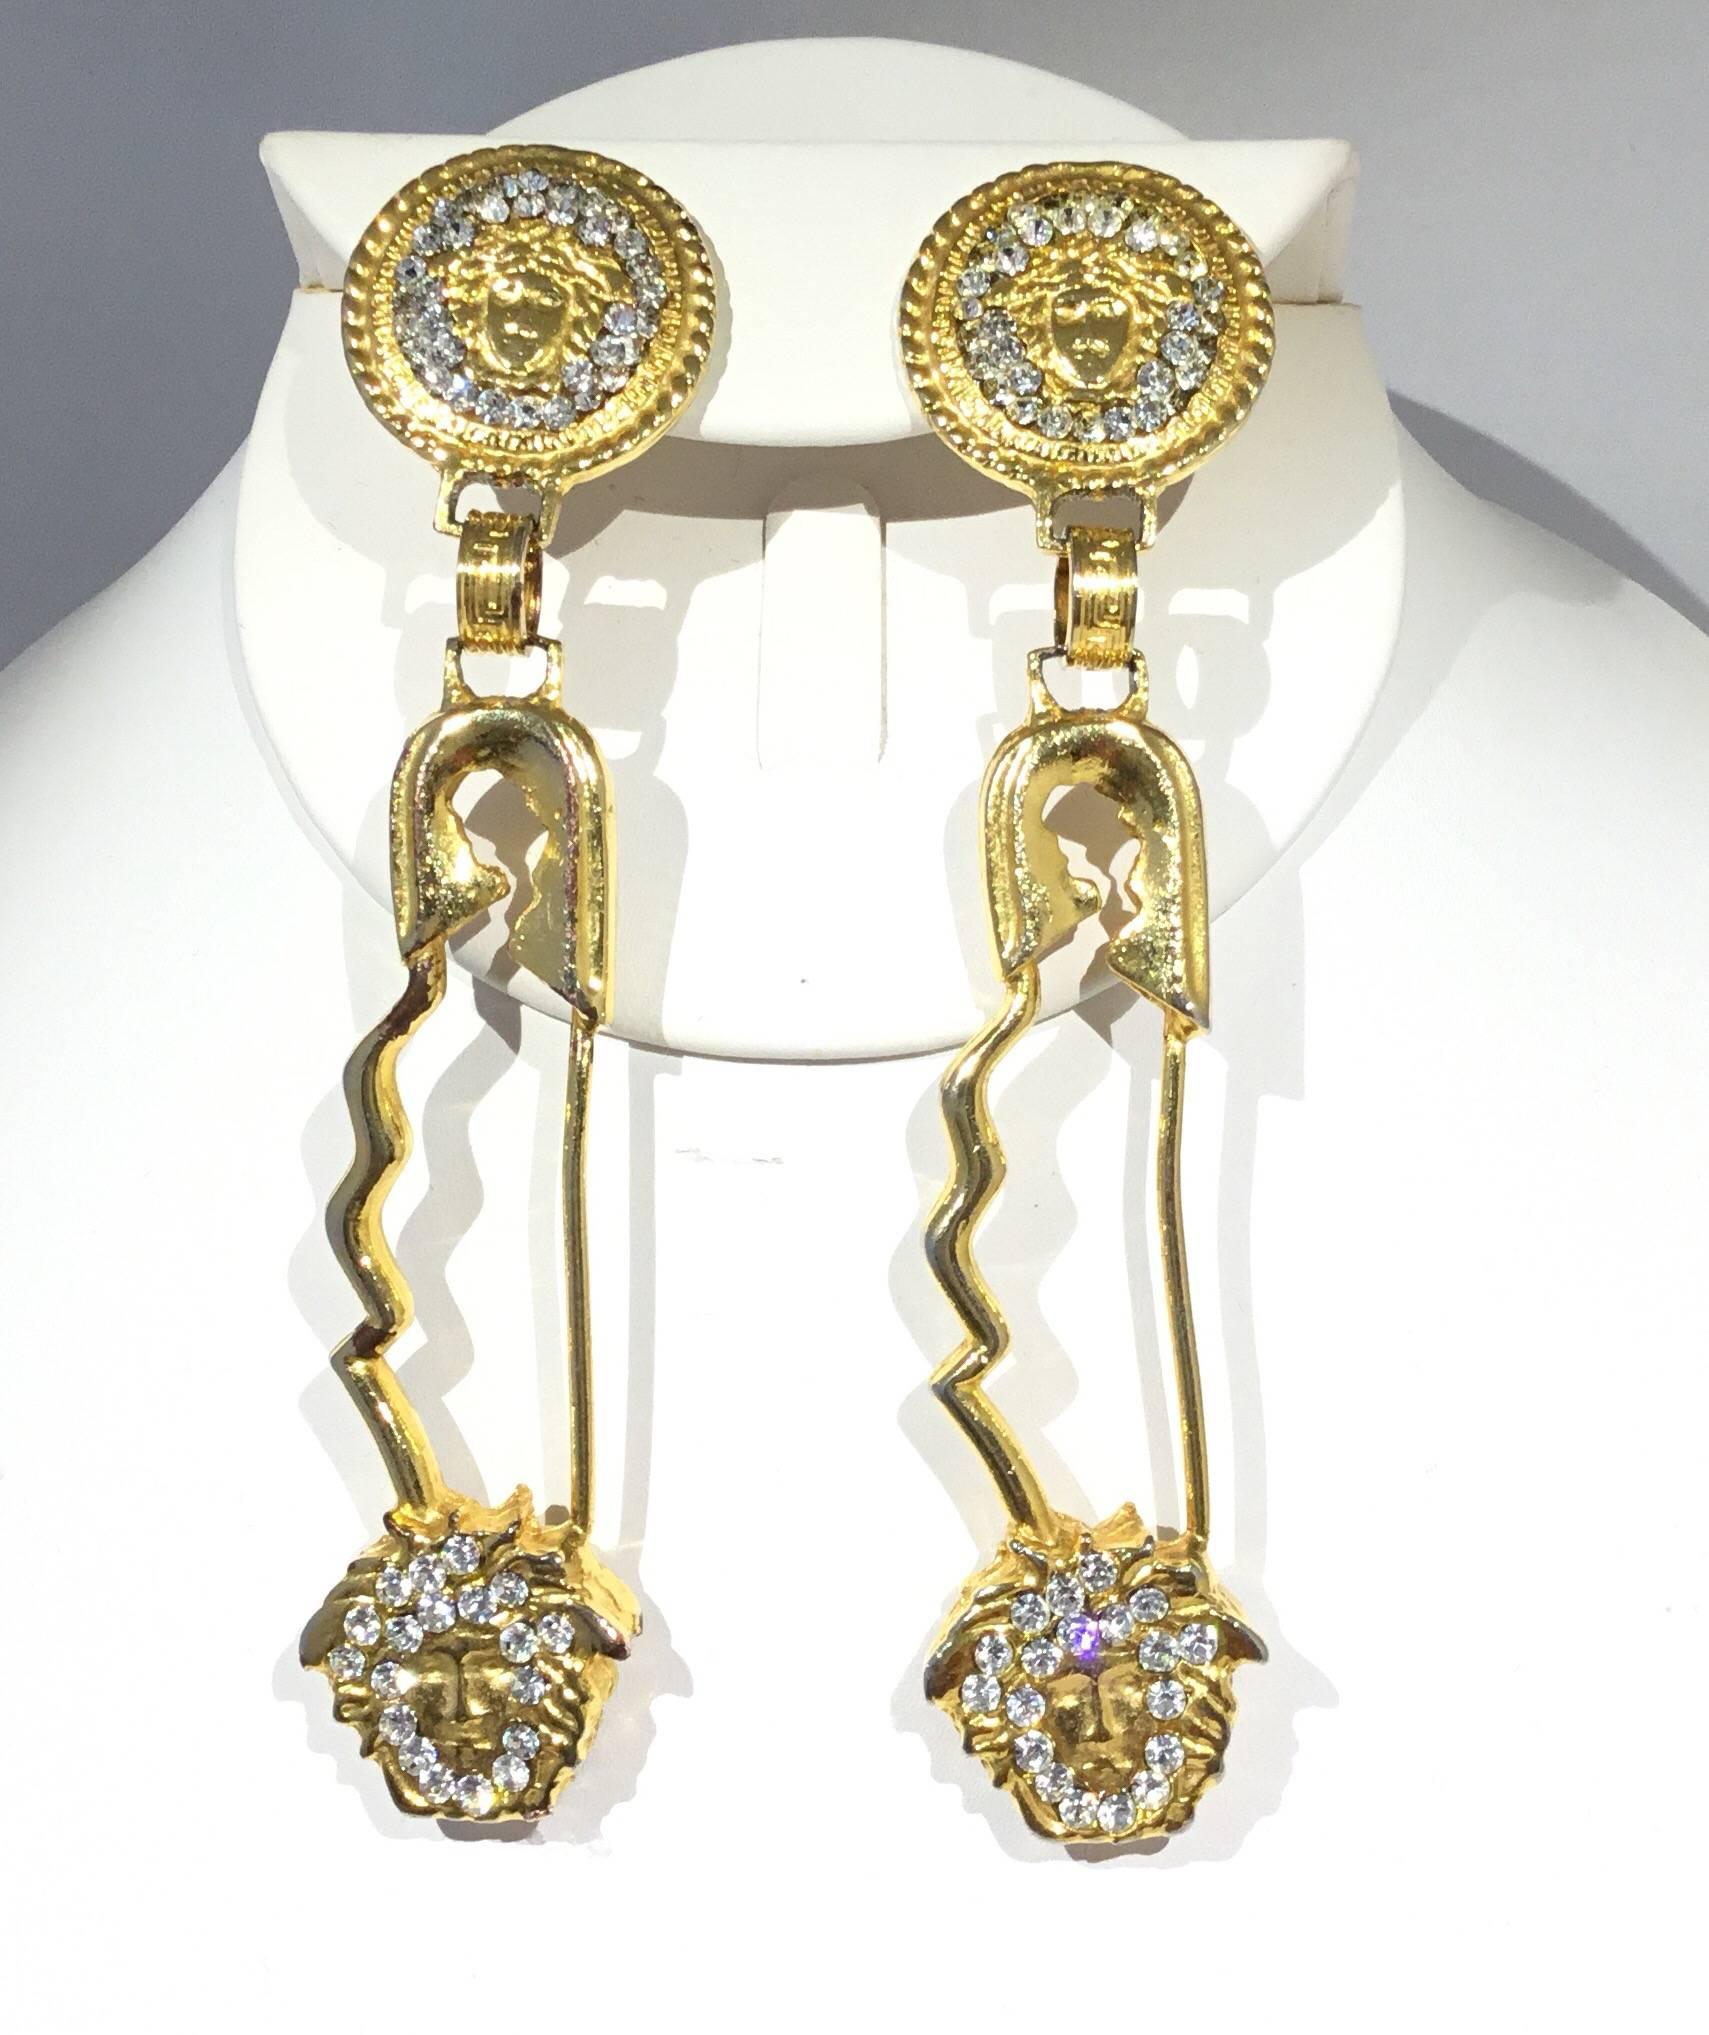 Iconic Gianni Versace vintage 1990s safety pin clip on earrings featured in gold tone with a rhinestone encrusted Medusa head detail. Approximately 4.5 inches long